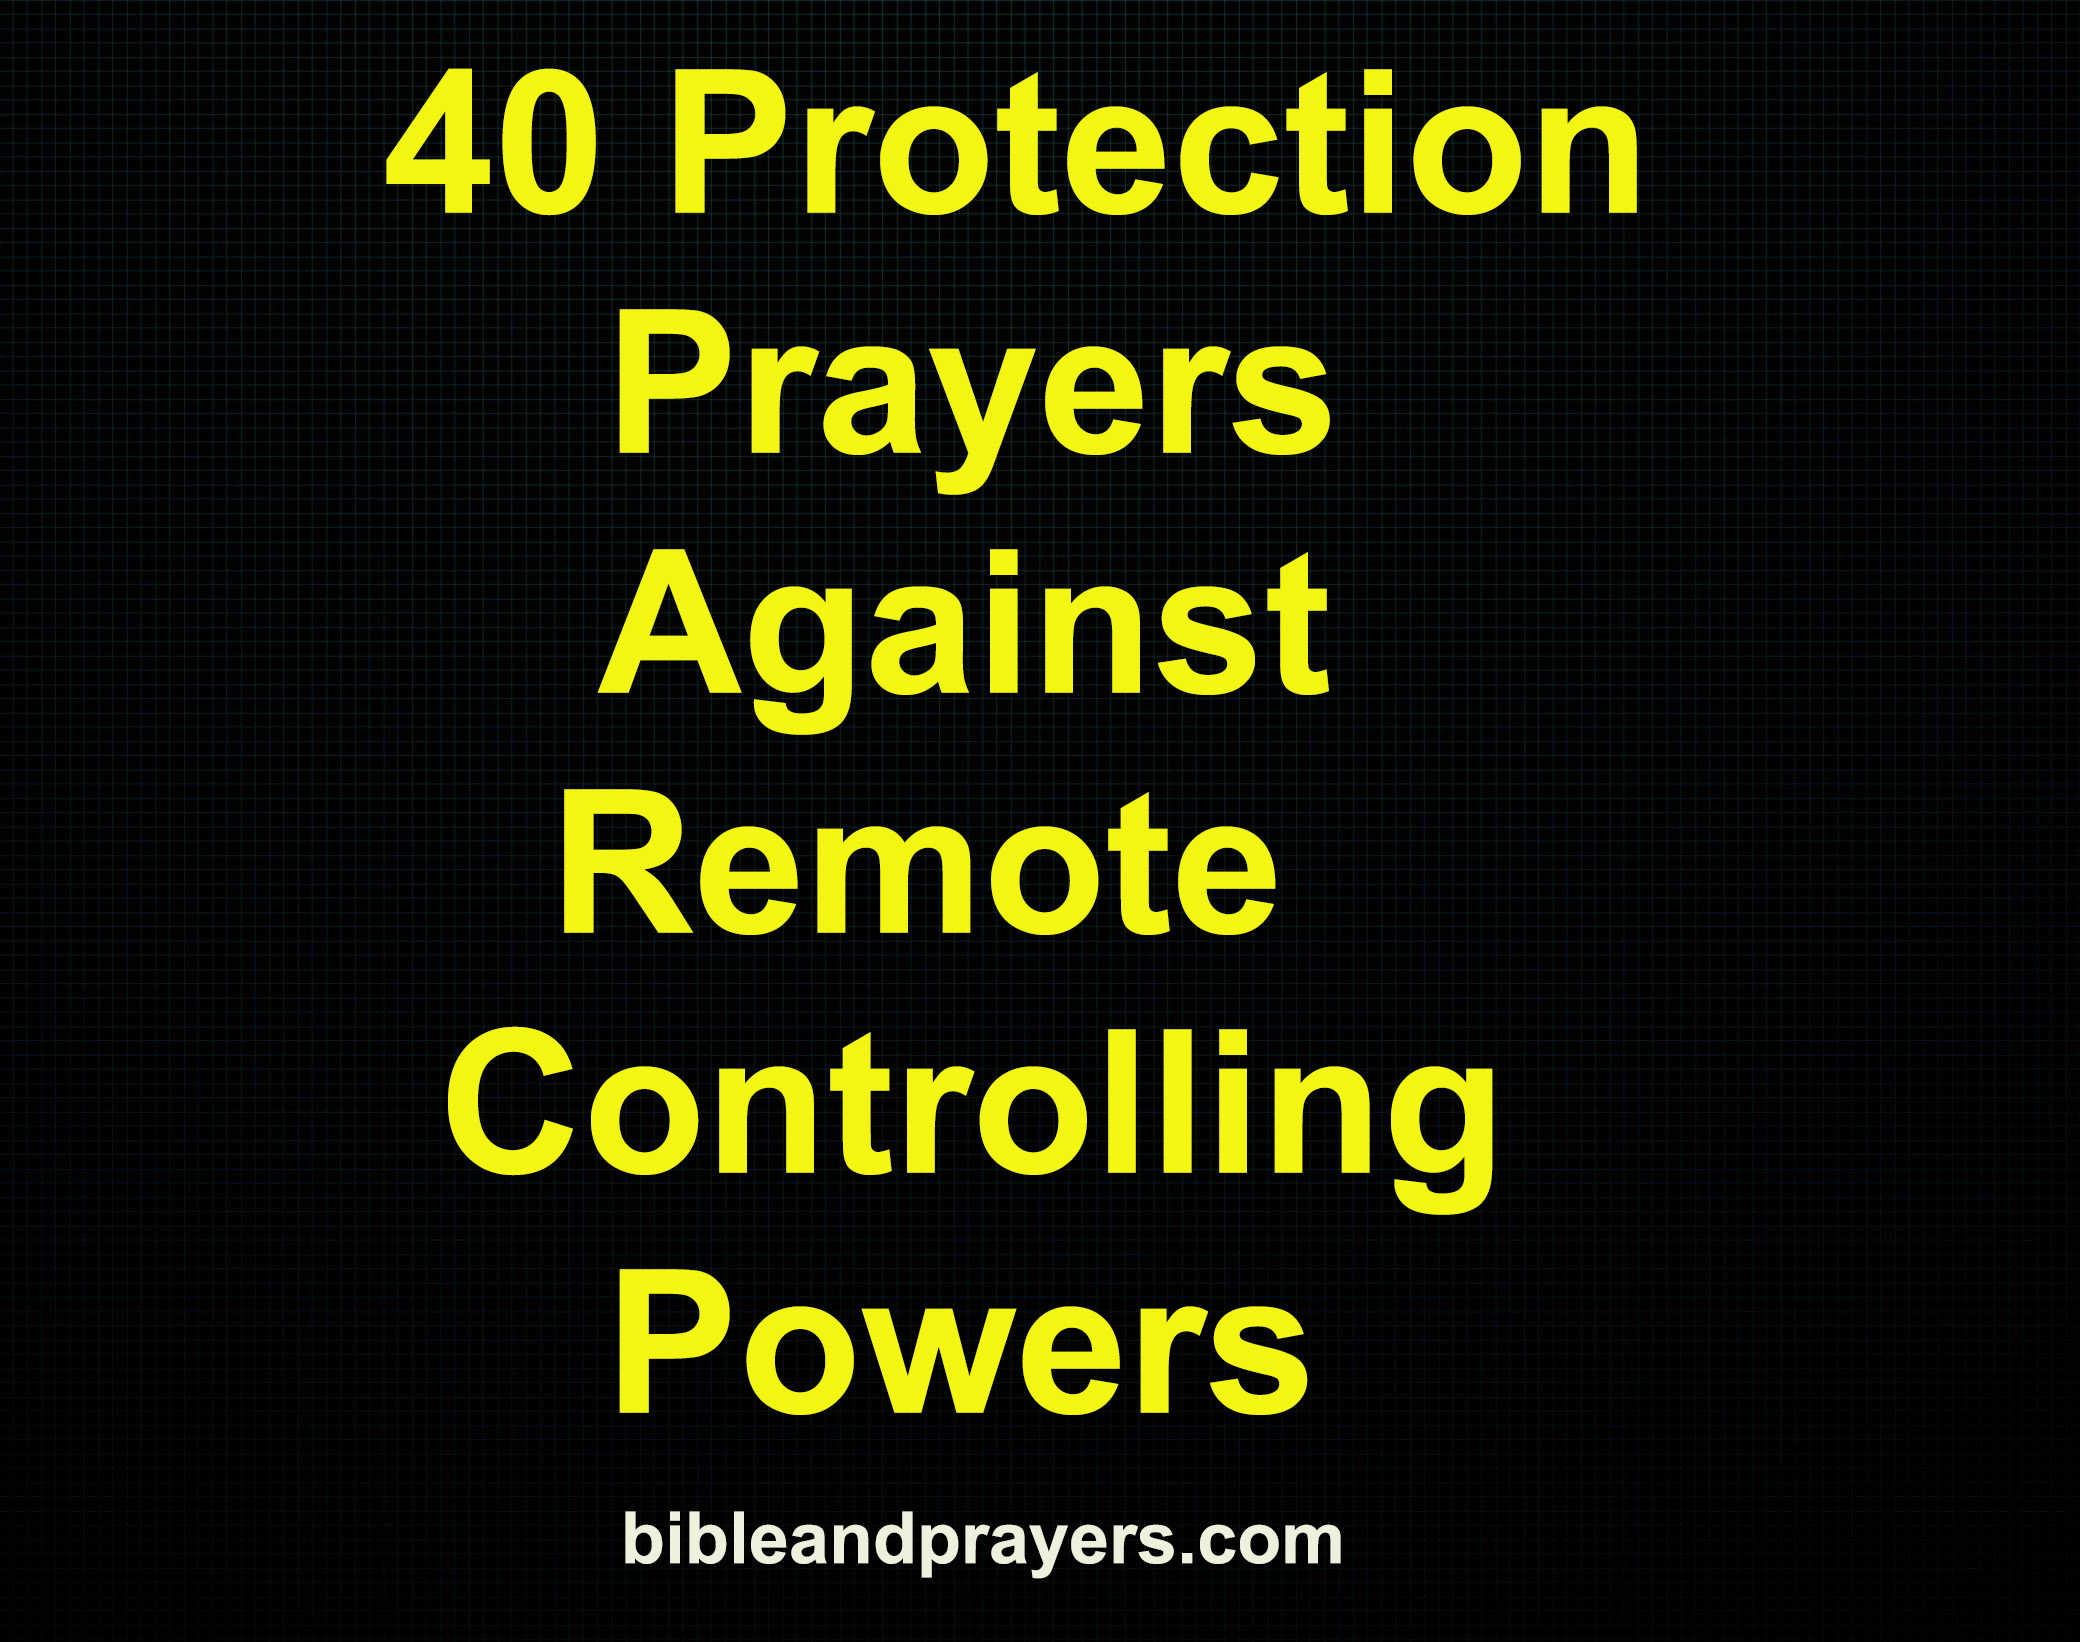 40 Protection Prayers Against Remote Controlling Powers